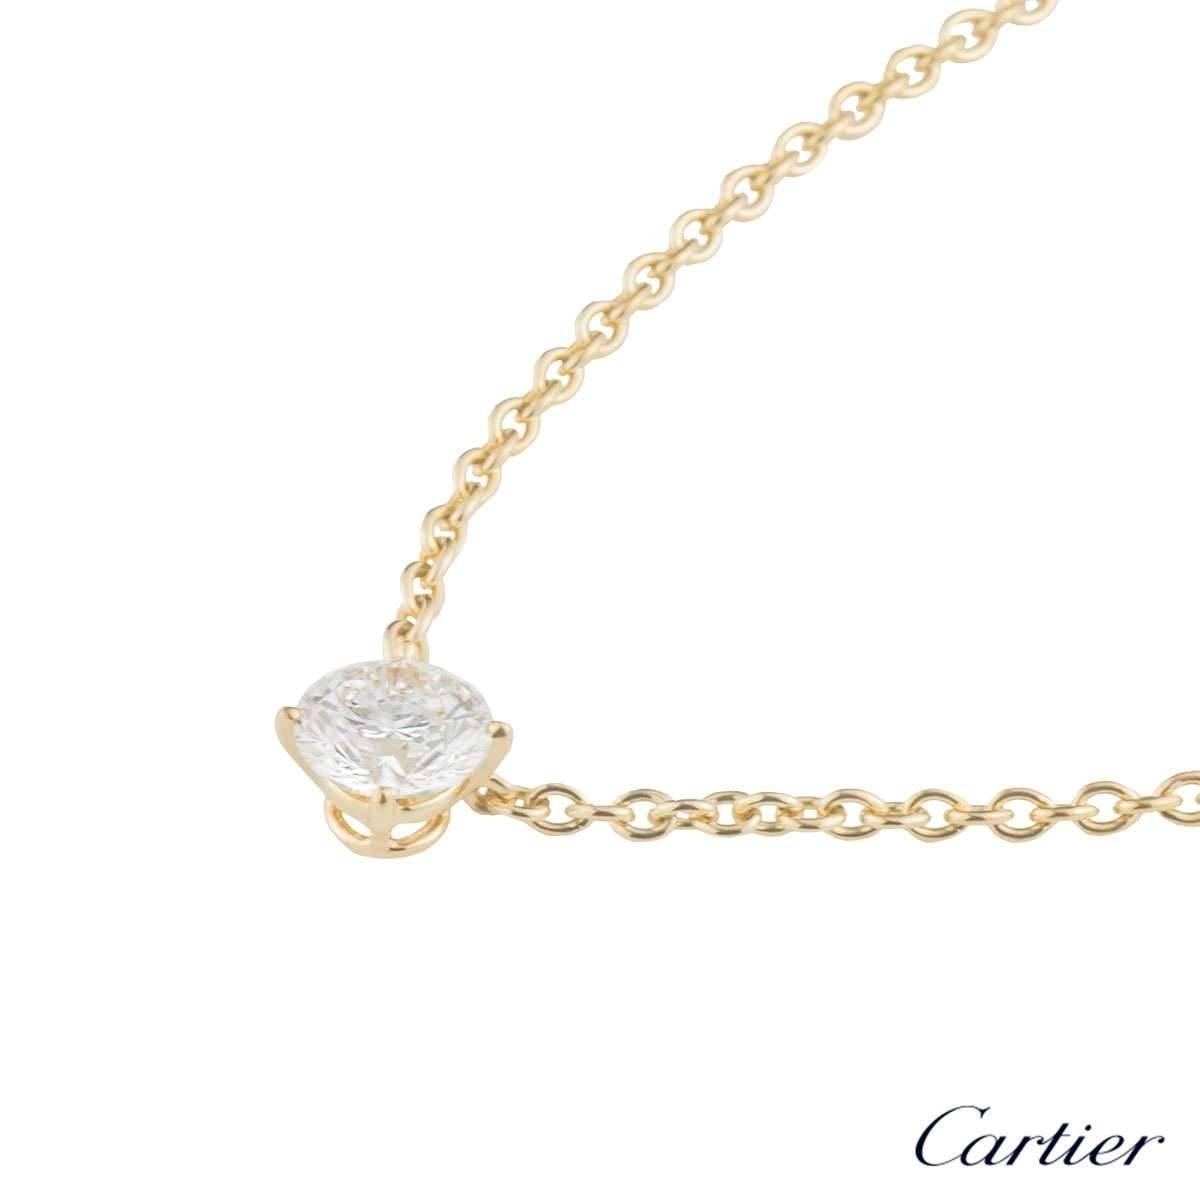 An exquisite 18k yellow gold diamond necklace from the 1895 collection by Cartier. The necklace features a claw set round brilliant cut diamond weighing 1.32ct, G colour and VS1 clarity. The diamond is set on an original 18k yellow gold 16 inch